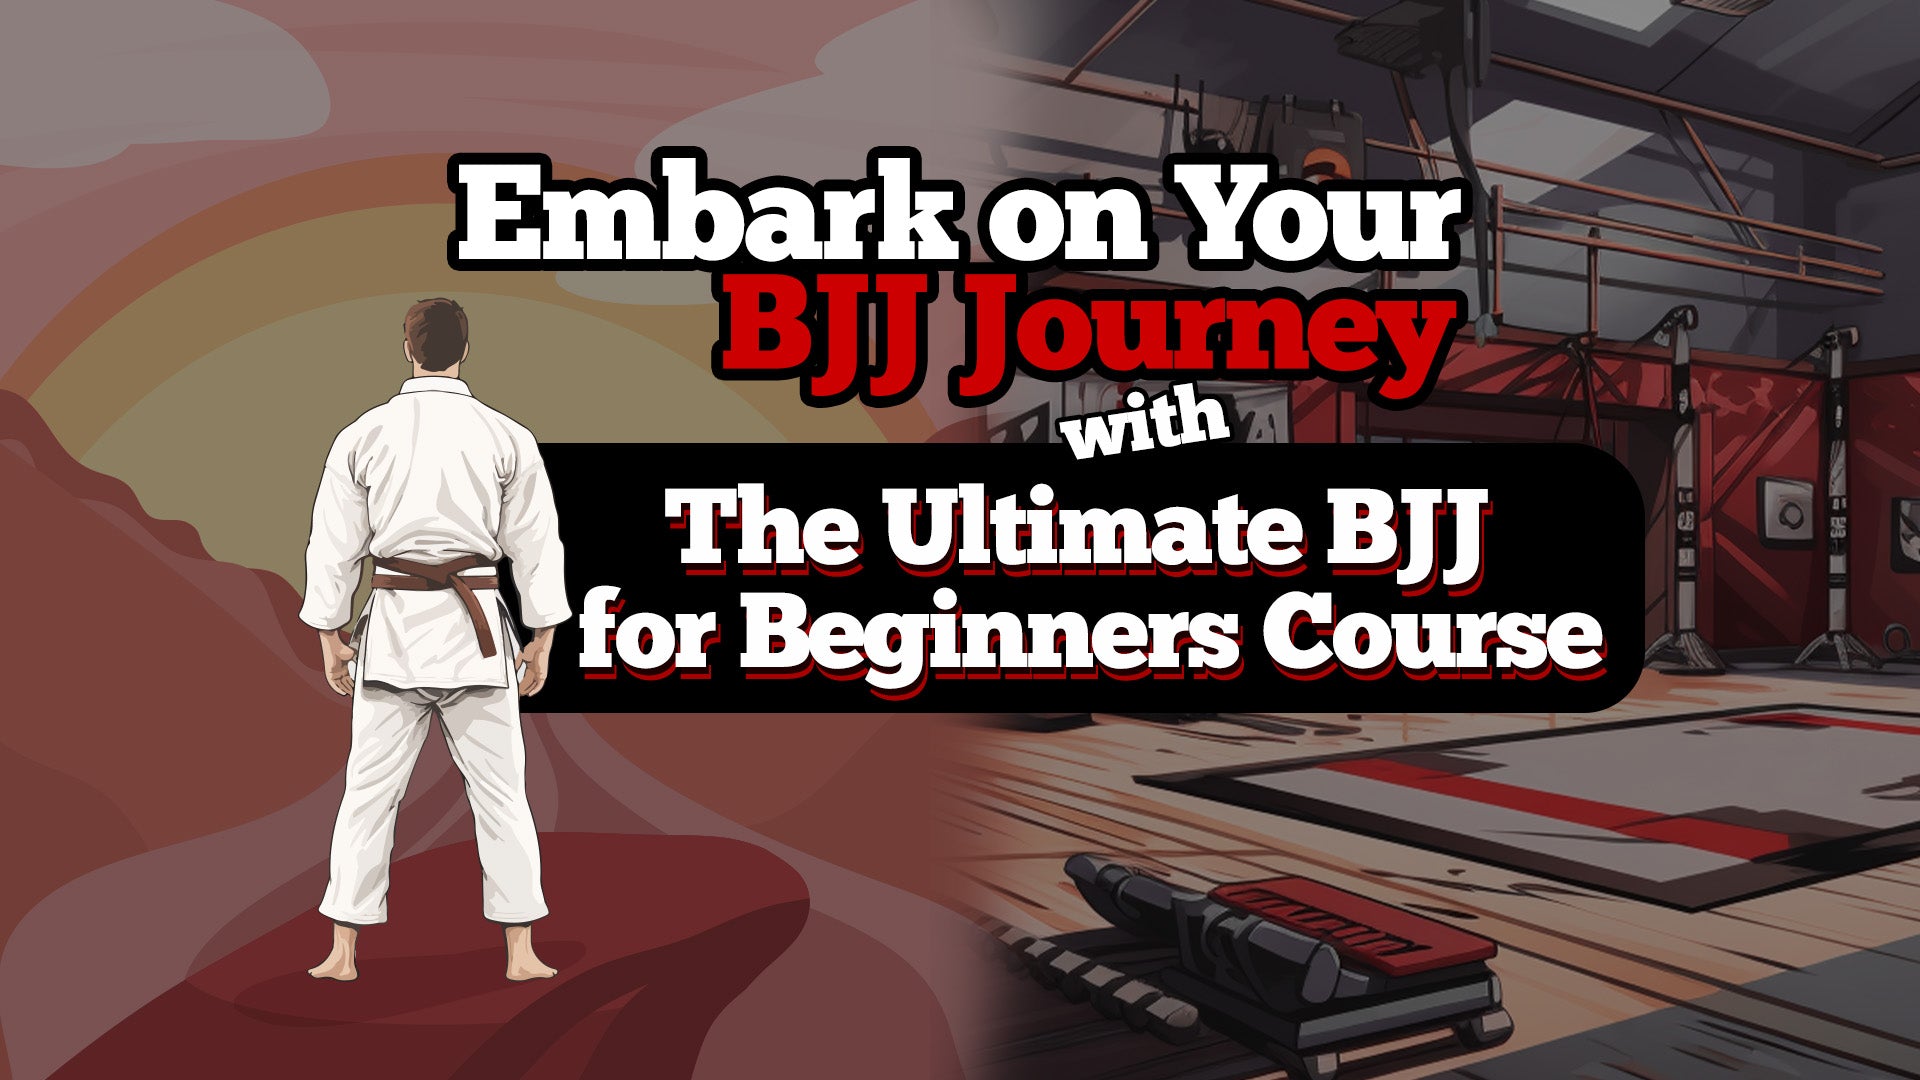 Embark on Your BJJ Journey with The Ultimate BJJ for Beginners Course